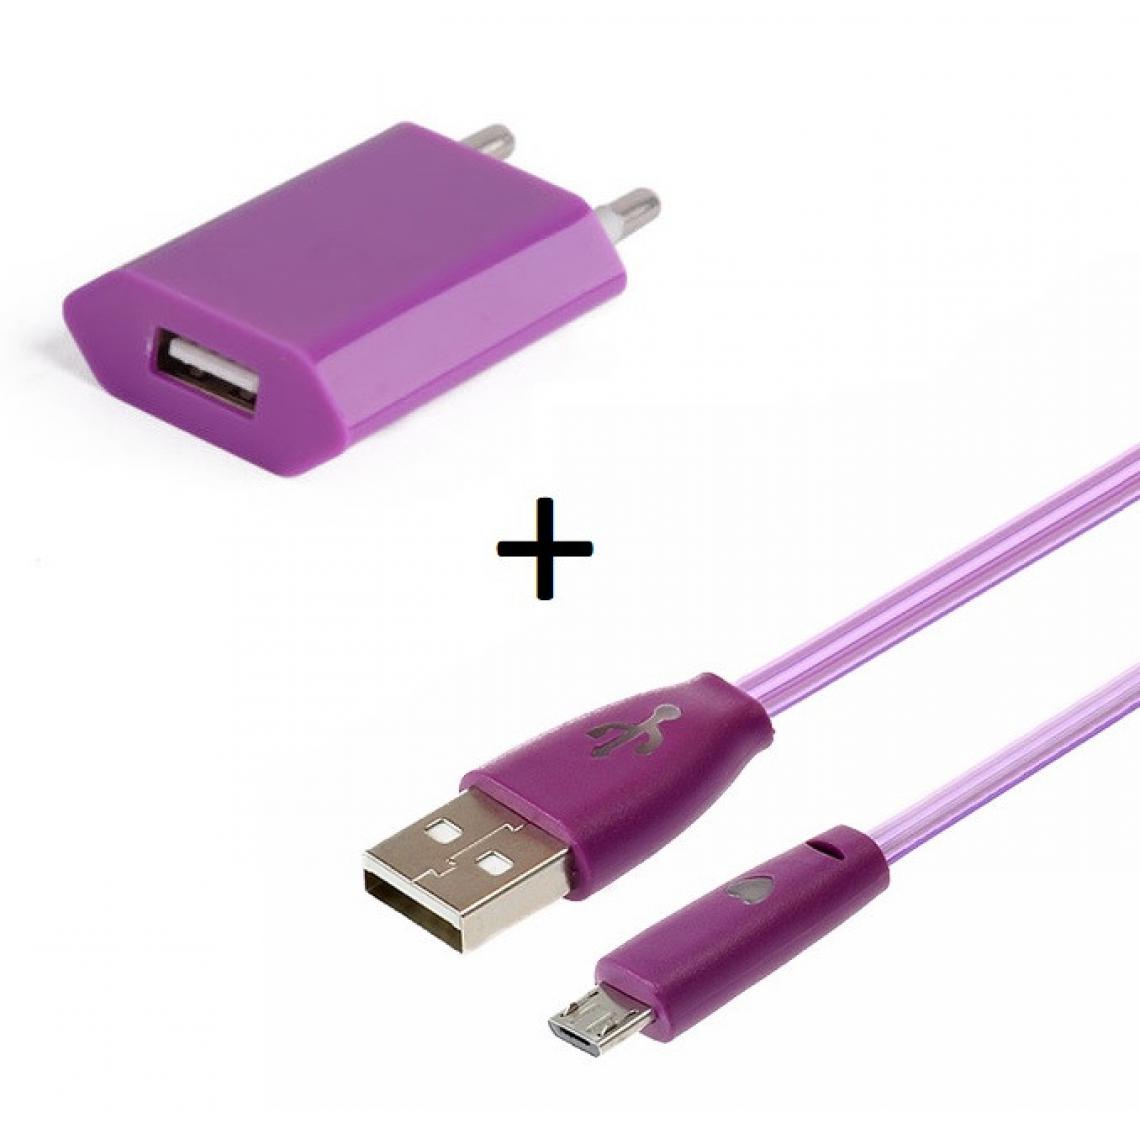 Shot - Pack Chargeur pour Ultimate Ears BLAST Smartphone Micro USB (Cable Smiley LED + Prise Secteur USB) Android (VIOLET) - Chargeur secteur téléphone